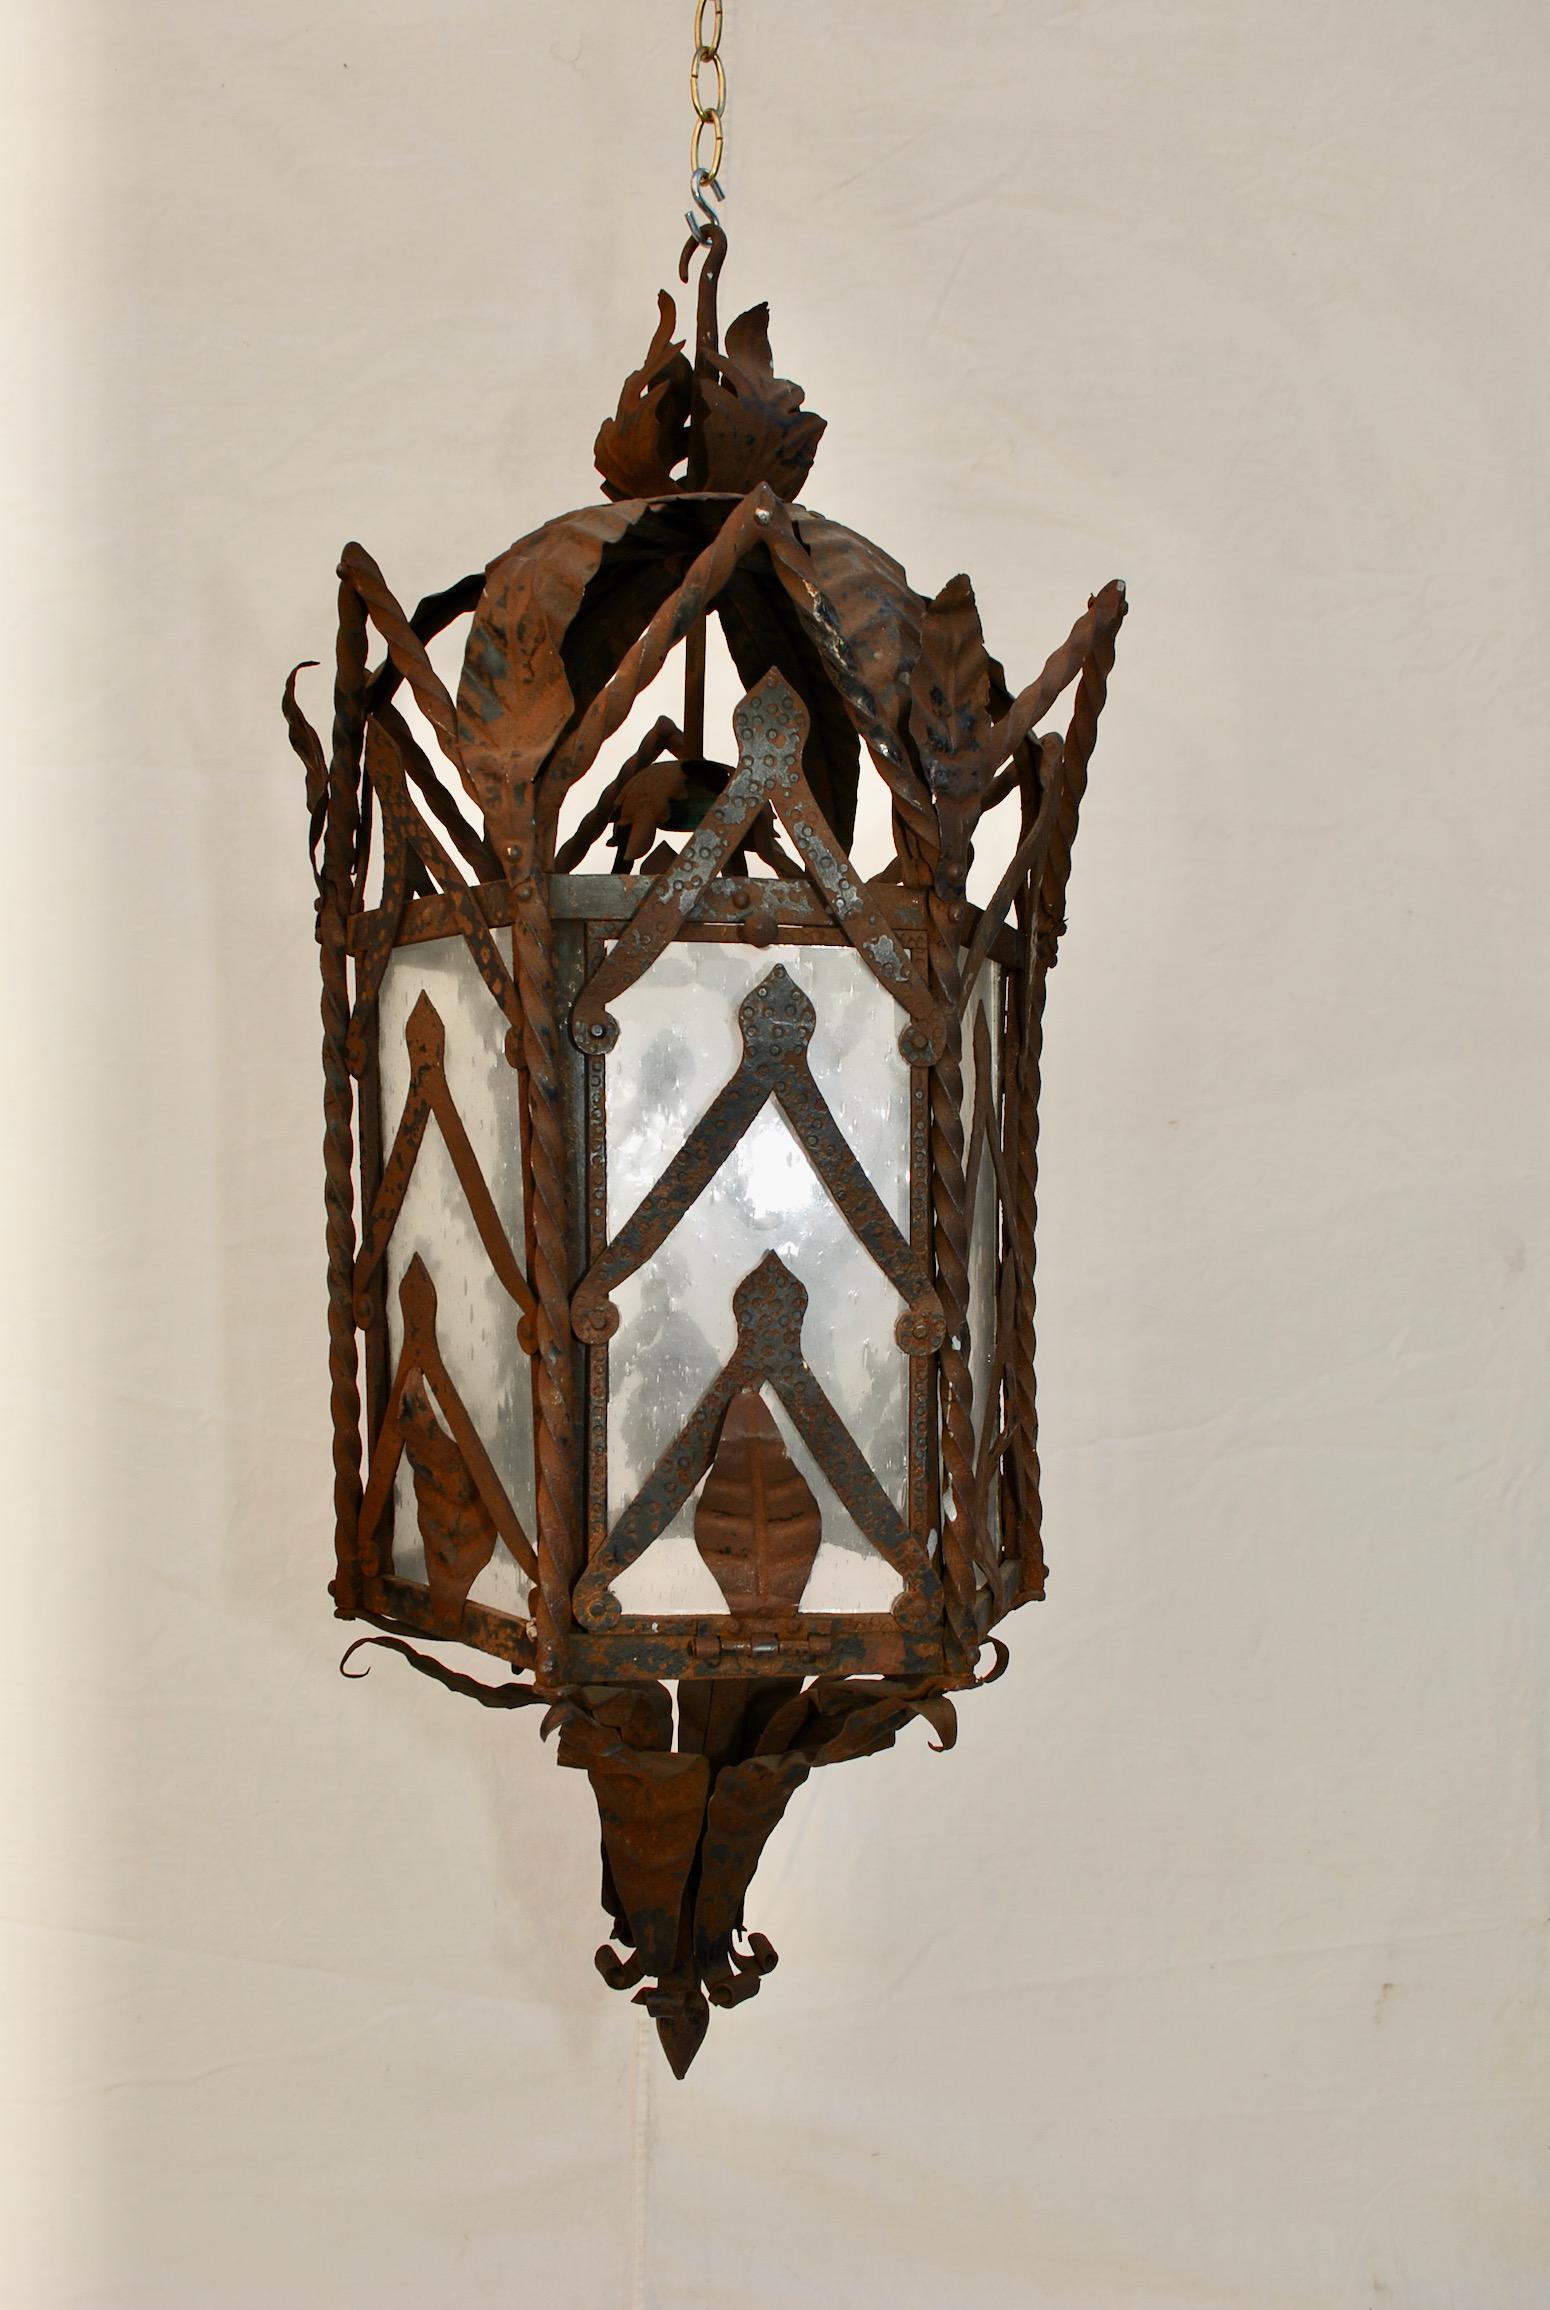 A large rustic French 1920's iron lantern, the lantern can be painted or restored, but I think it has allot of charms the way it is, especially if you want to do a rustic decor.